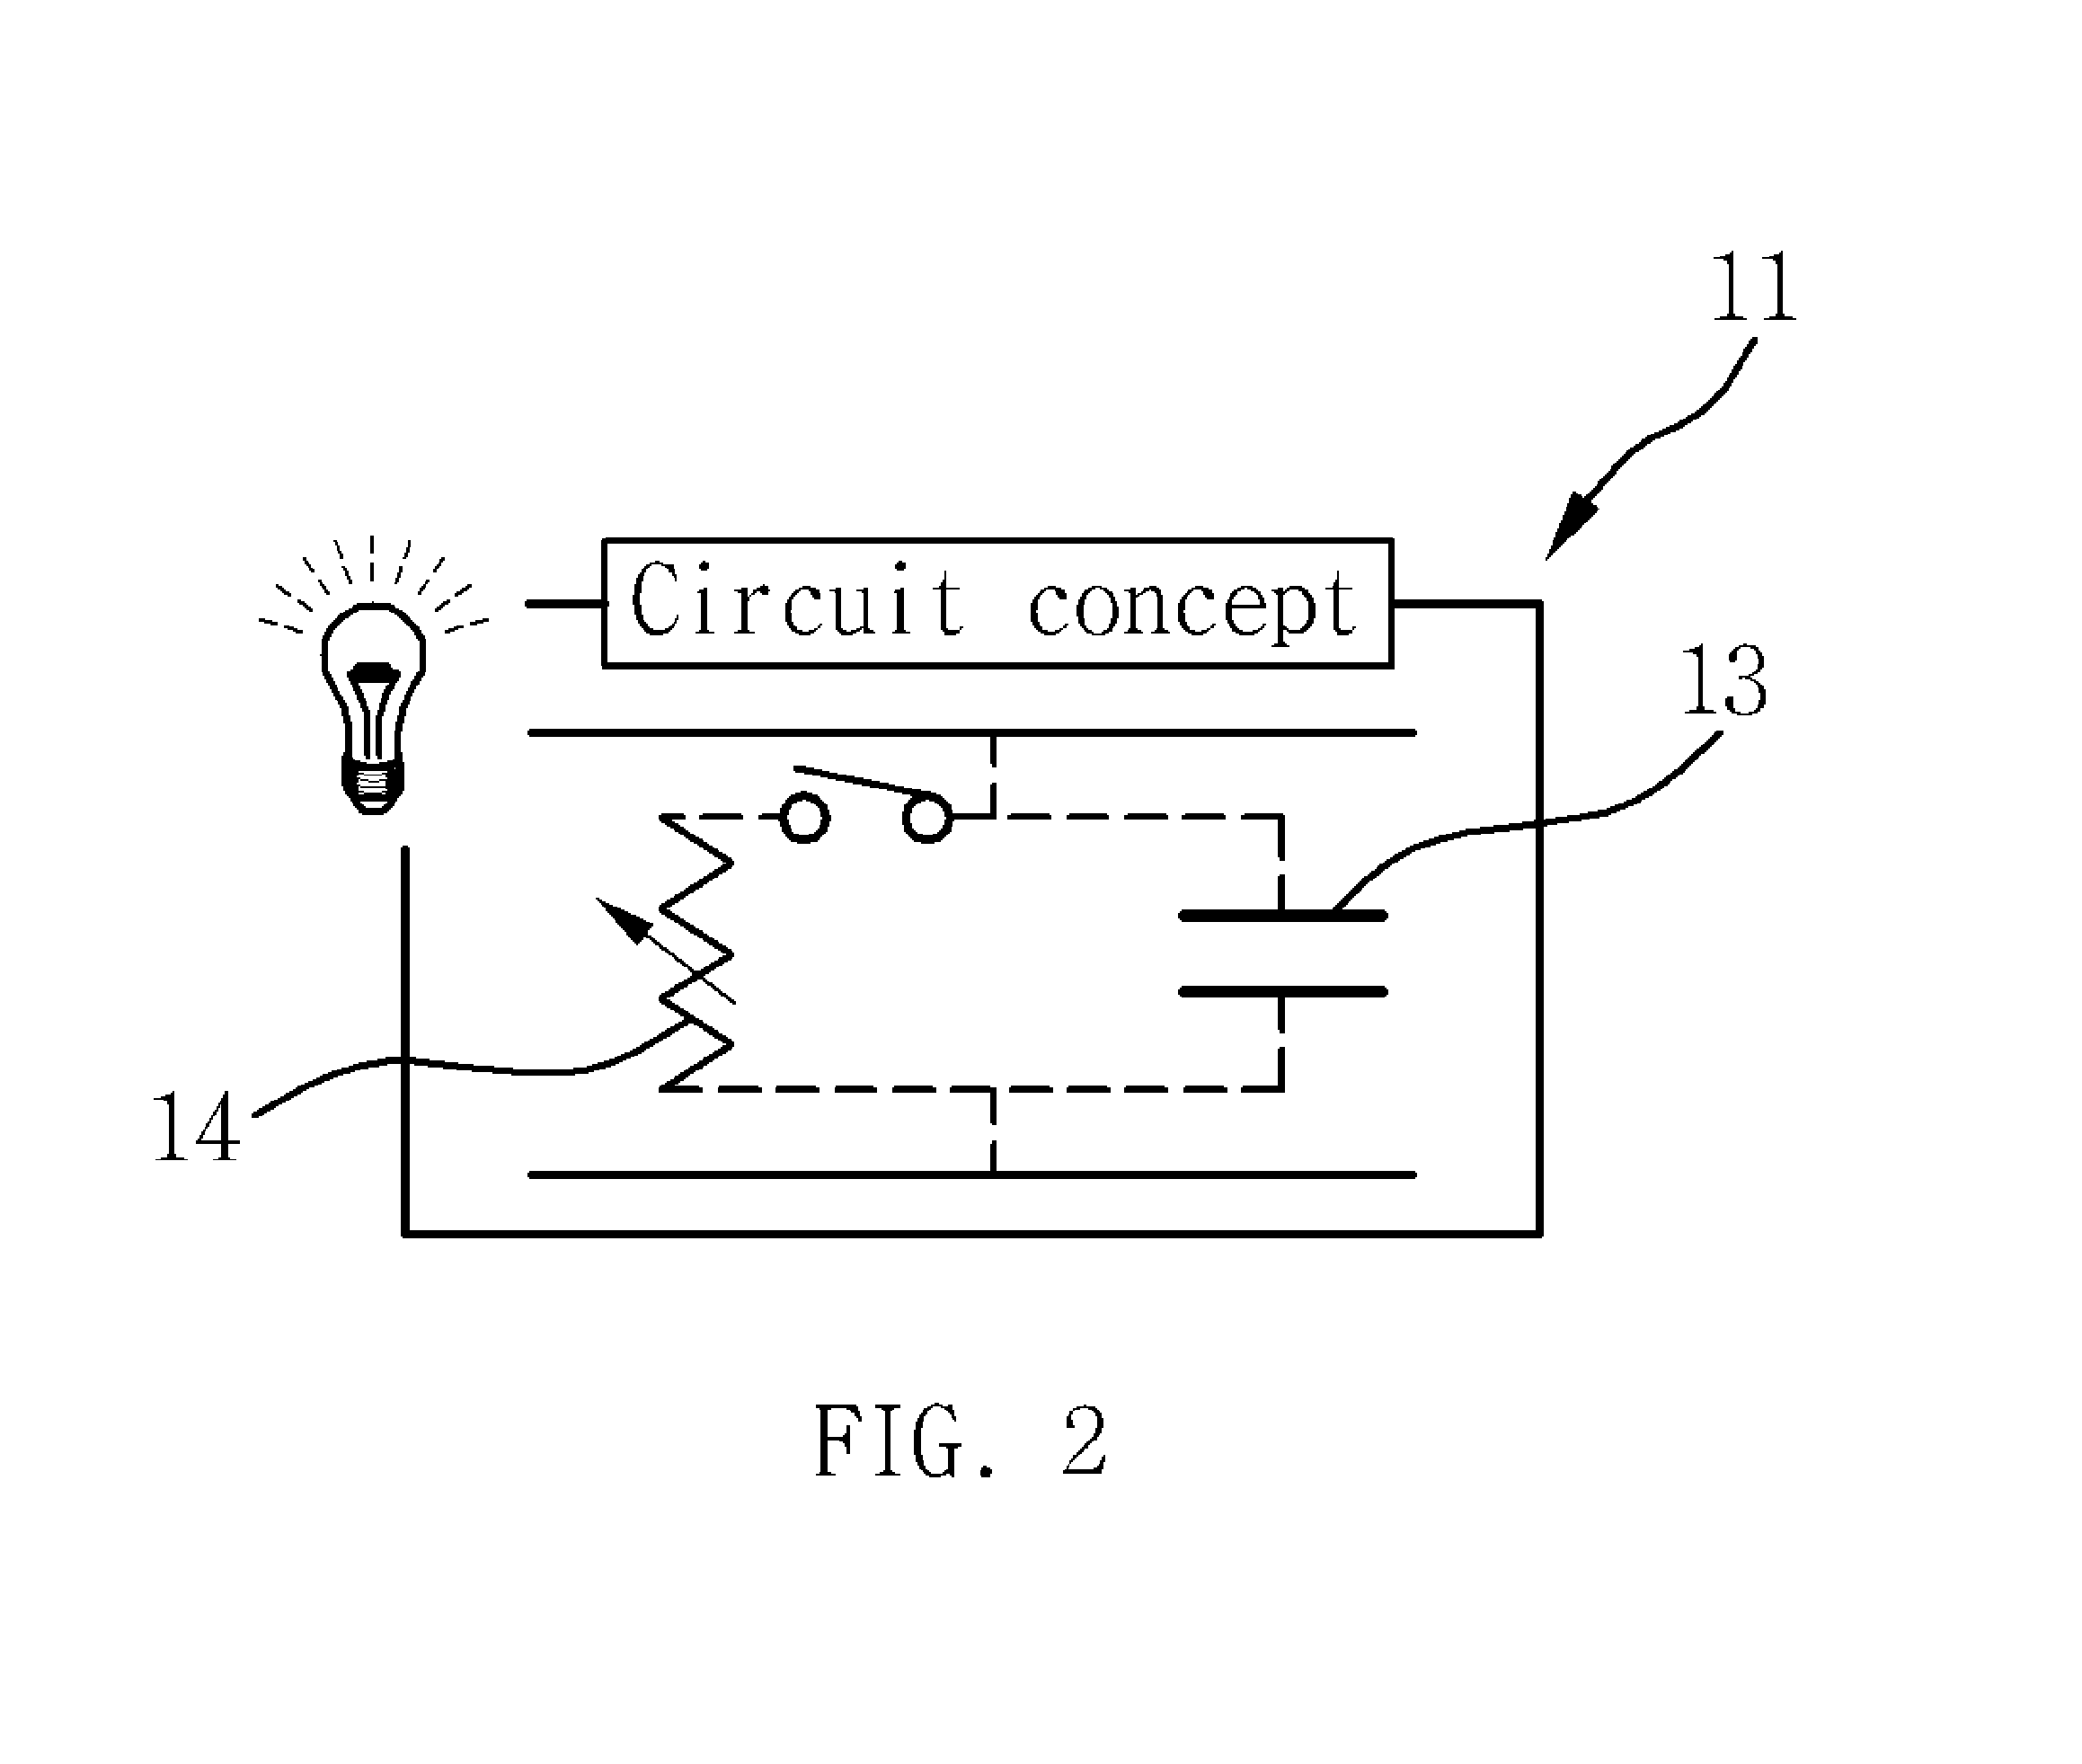 Motor power simulating apparatus for fuel cell power module evaluation